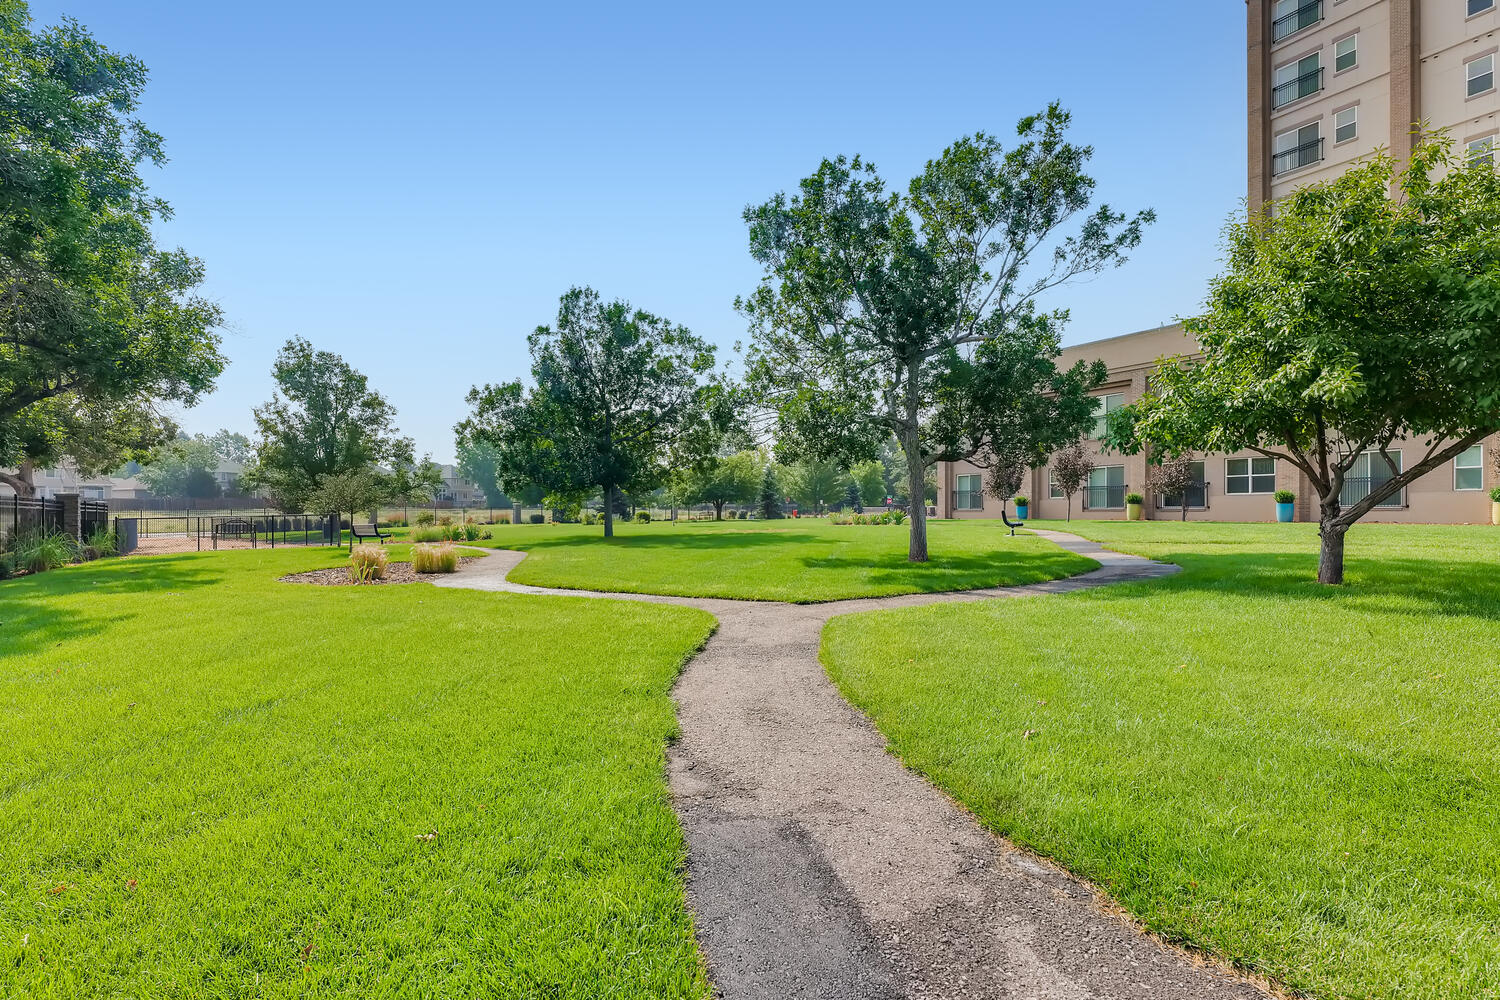 Outdoor walking paths at Bella Vita surrounded by grass, trees, and benches.